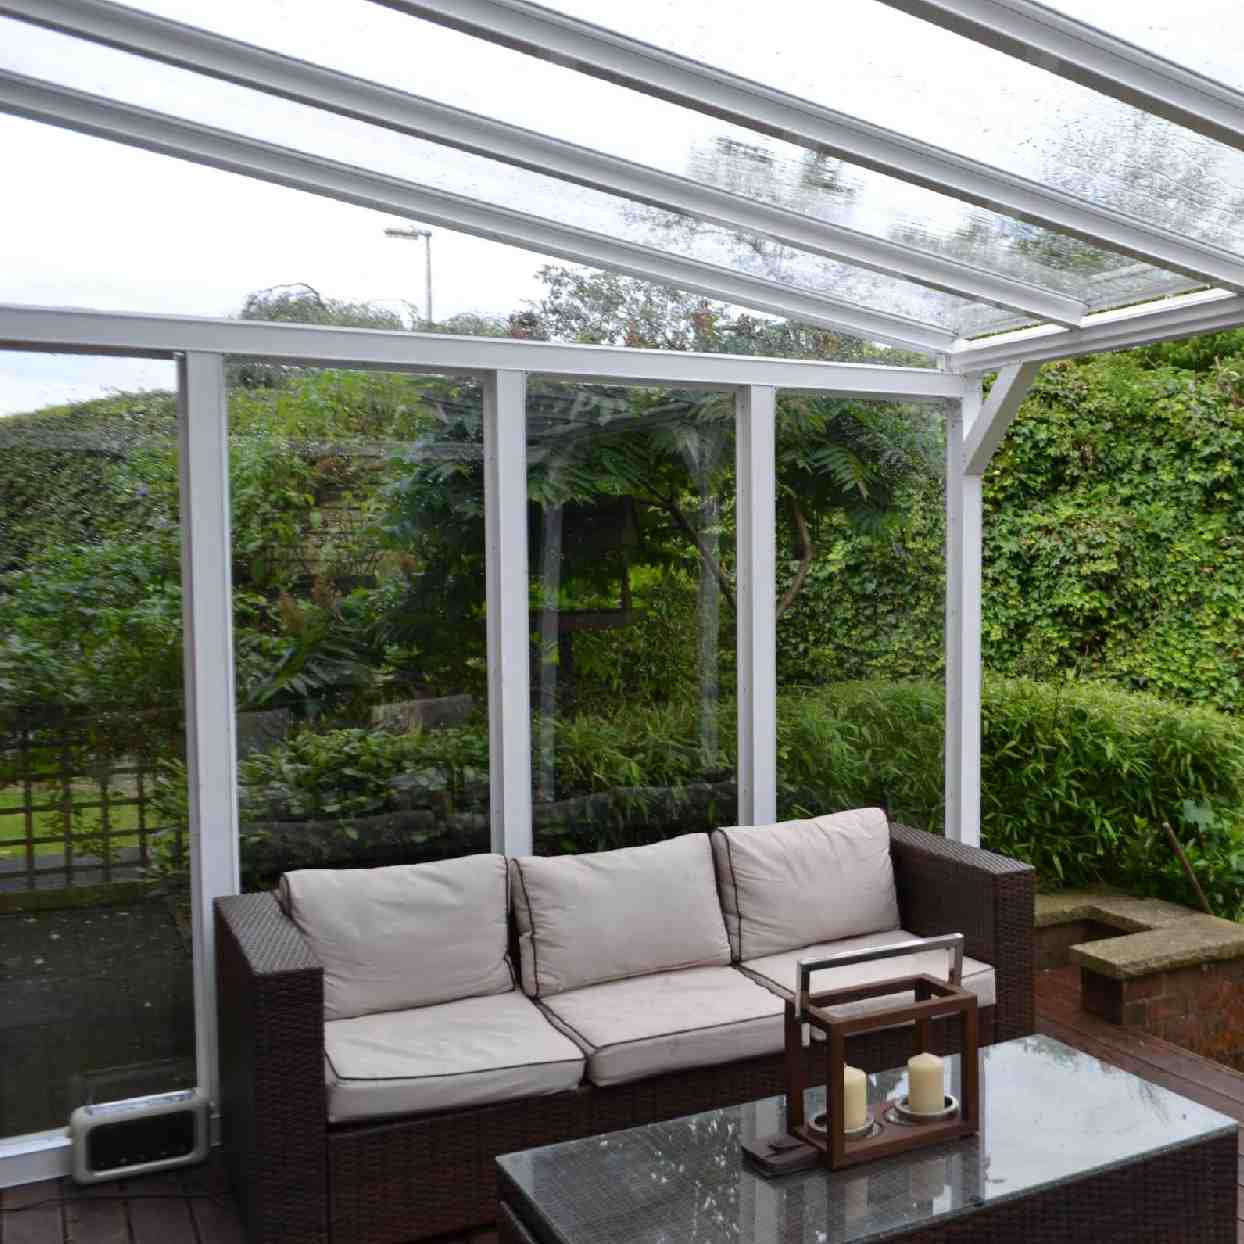 Buy Omega Verandah White with 6mm Glass Clear Plate Polycarbonate Glazing - 4.9m (W) x 2.5m (P), (3) Supporting Posts online today